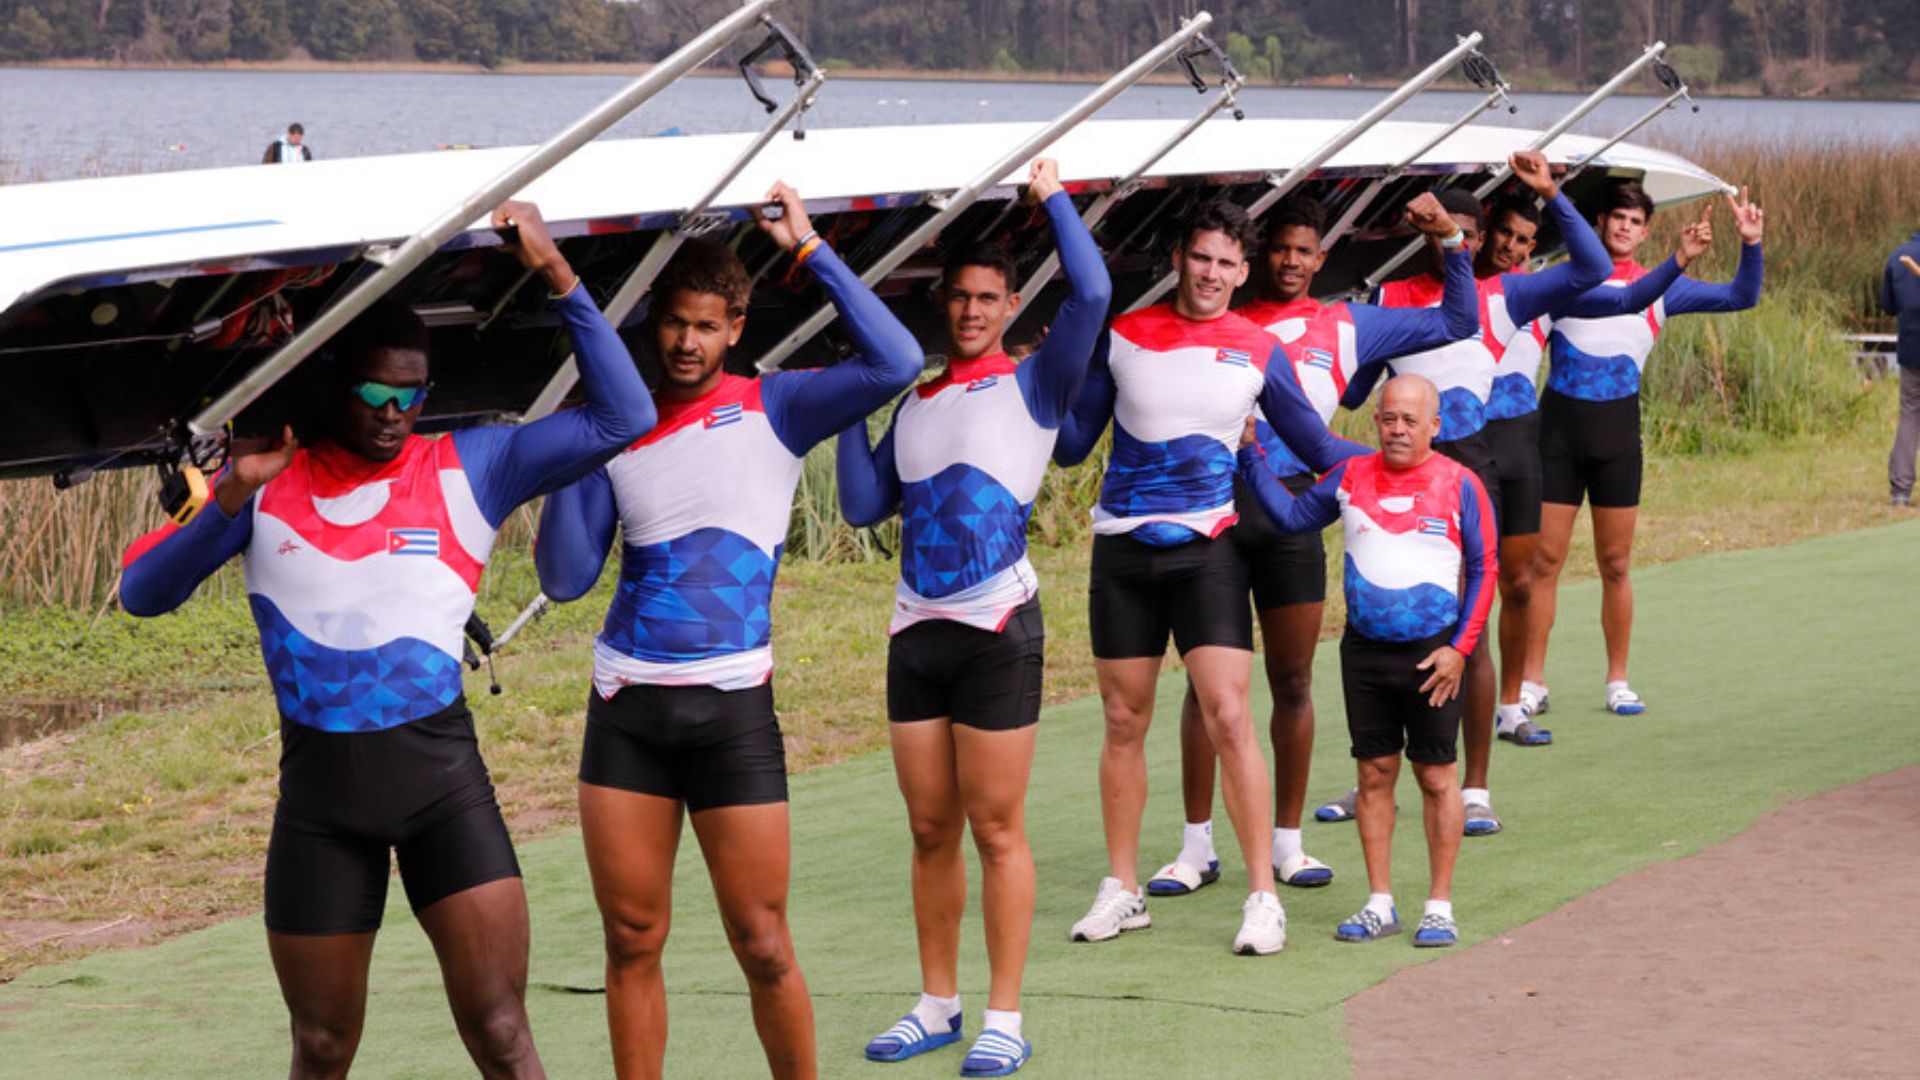 Cuba gets their revenge, and Chile adds a new rowing medal